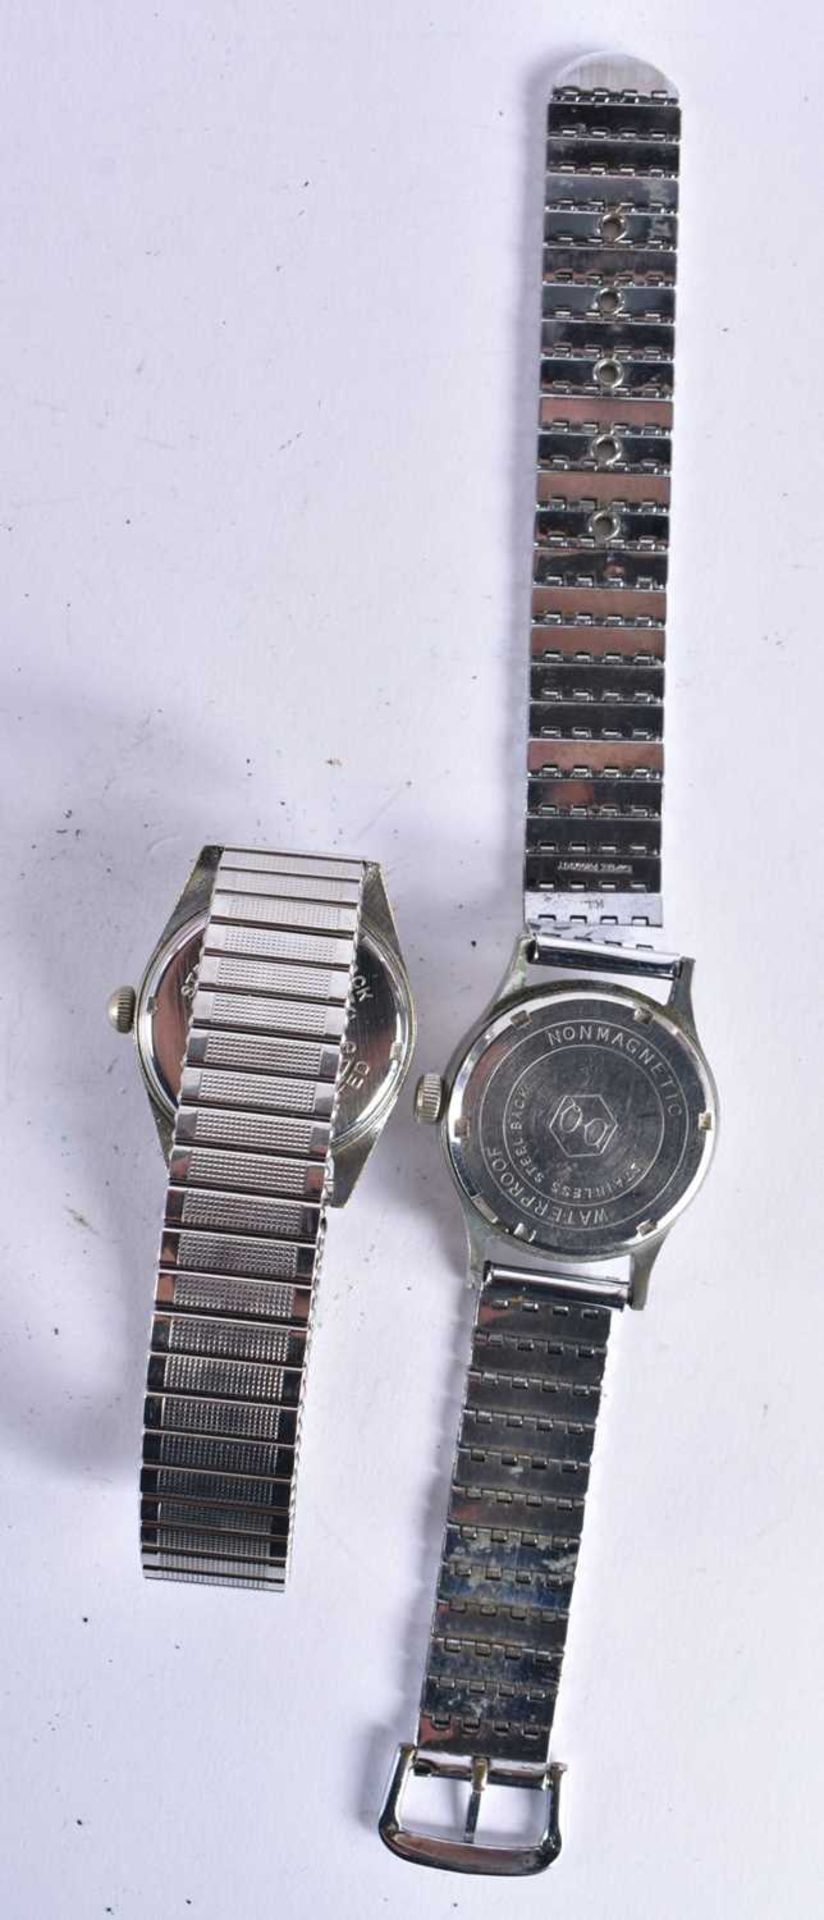 Gents Vintage Military Style Wristwatches Hand-wind/Automatic Working x 2. (2) - Image 5 of 5